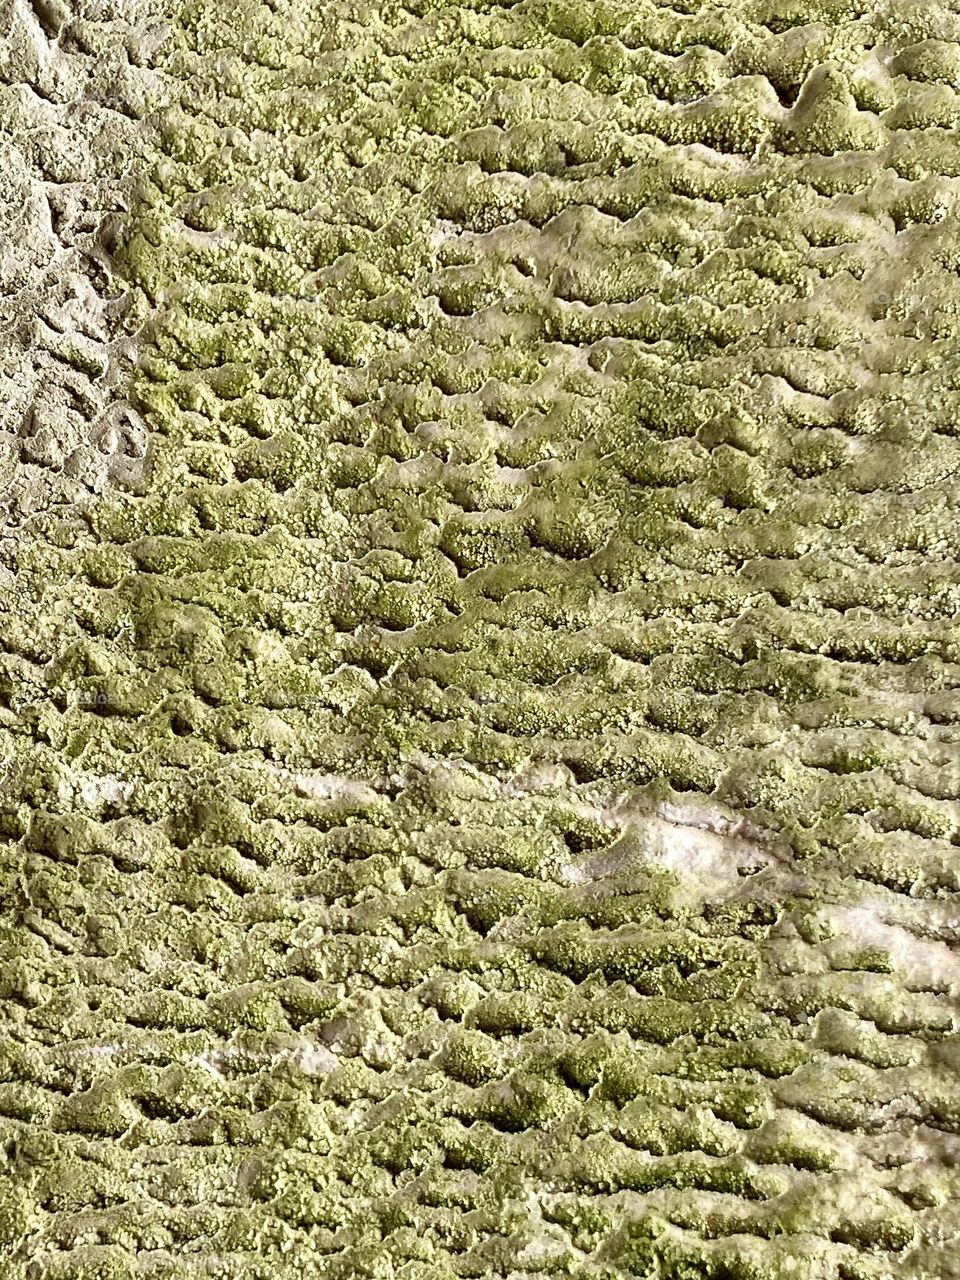 Mineral deposits on the wall of a tunnel